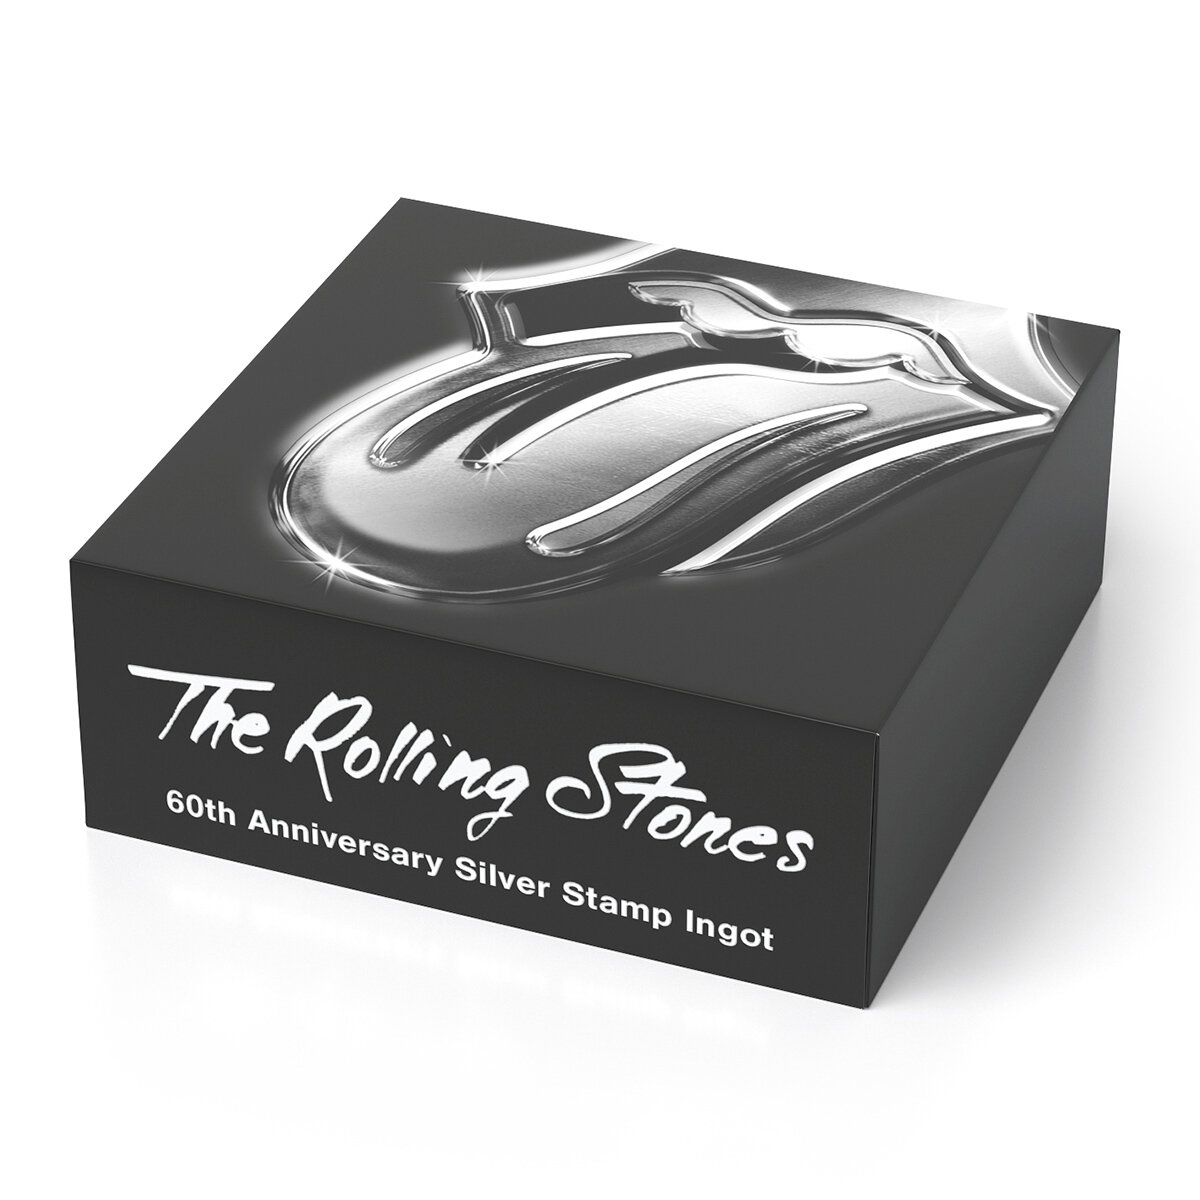 Buy The Rolling Stones Silver Stamp Ingot Cert1 Image at Costco.co.uk